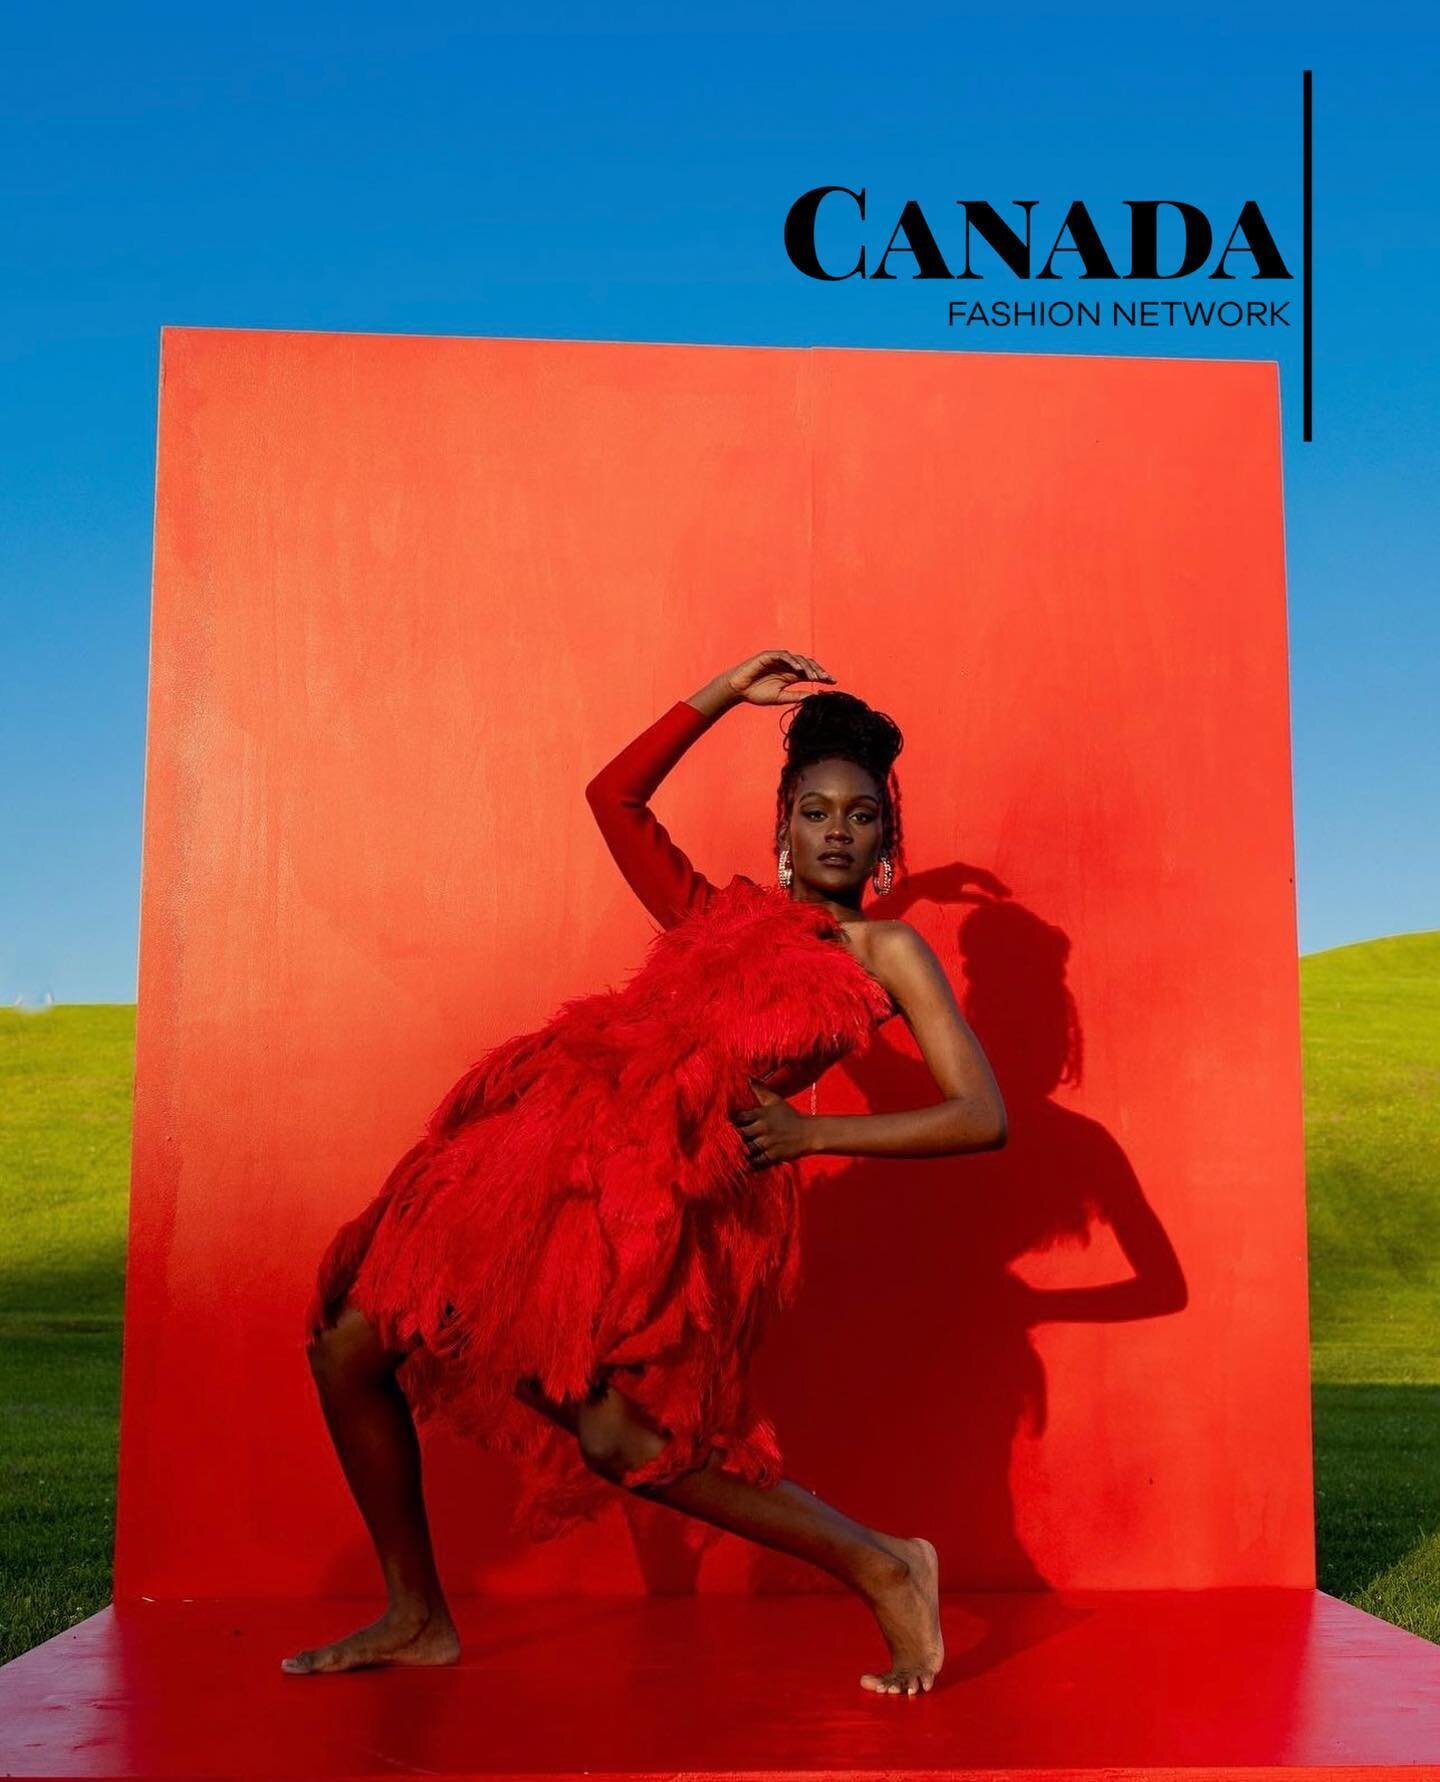 Merry Christmas, and Happy Holidays from our CFN family to yours! ❤️

For more information about CFN/RMC and our mission and community, visit www.canadafashionnetwork.com. 

Model: @tia_1702 
Creative Director/Photographer: @oladimeg
Stylist: @anitah